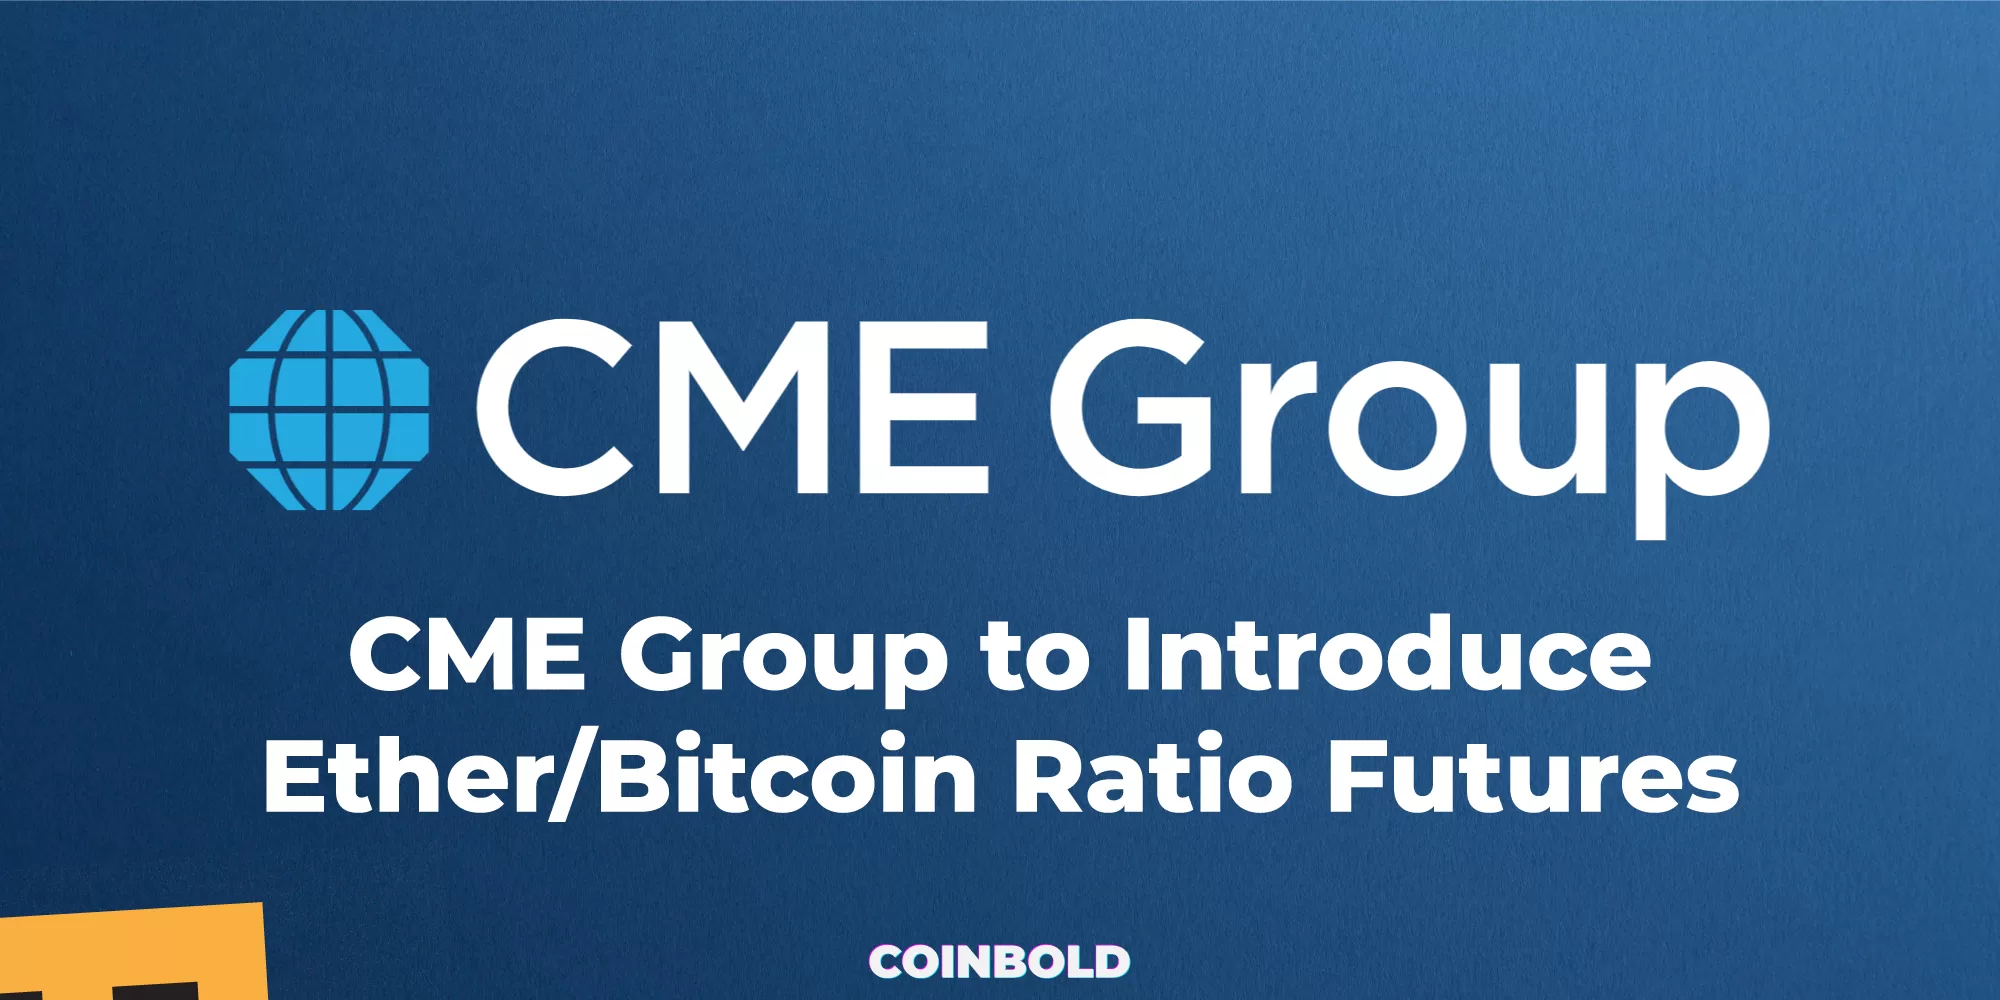 CME Group to Introduce Ether/Bitcoin Ratio Futures